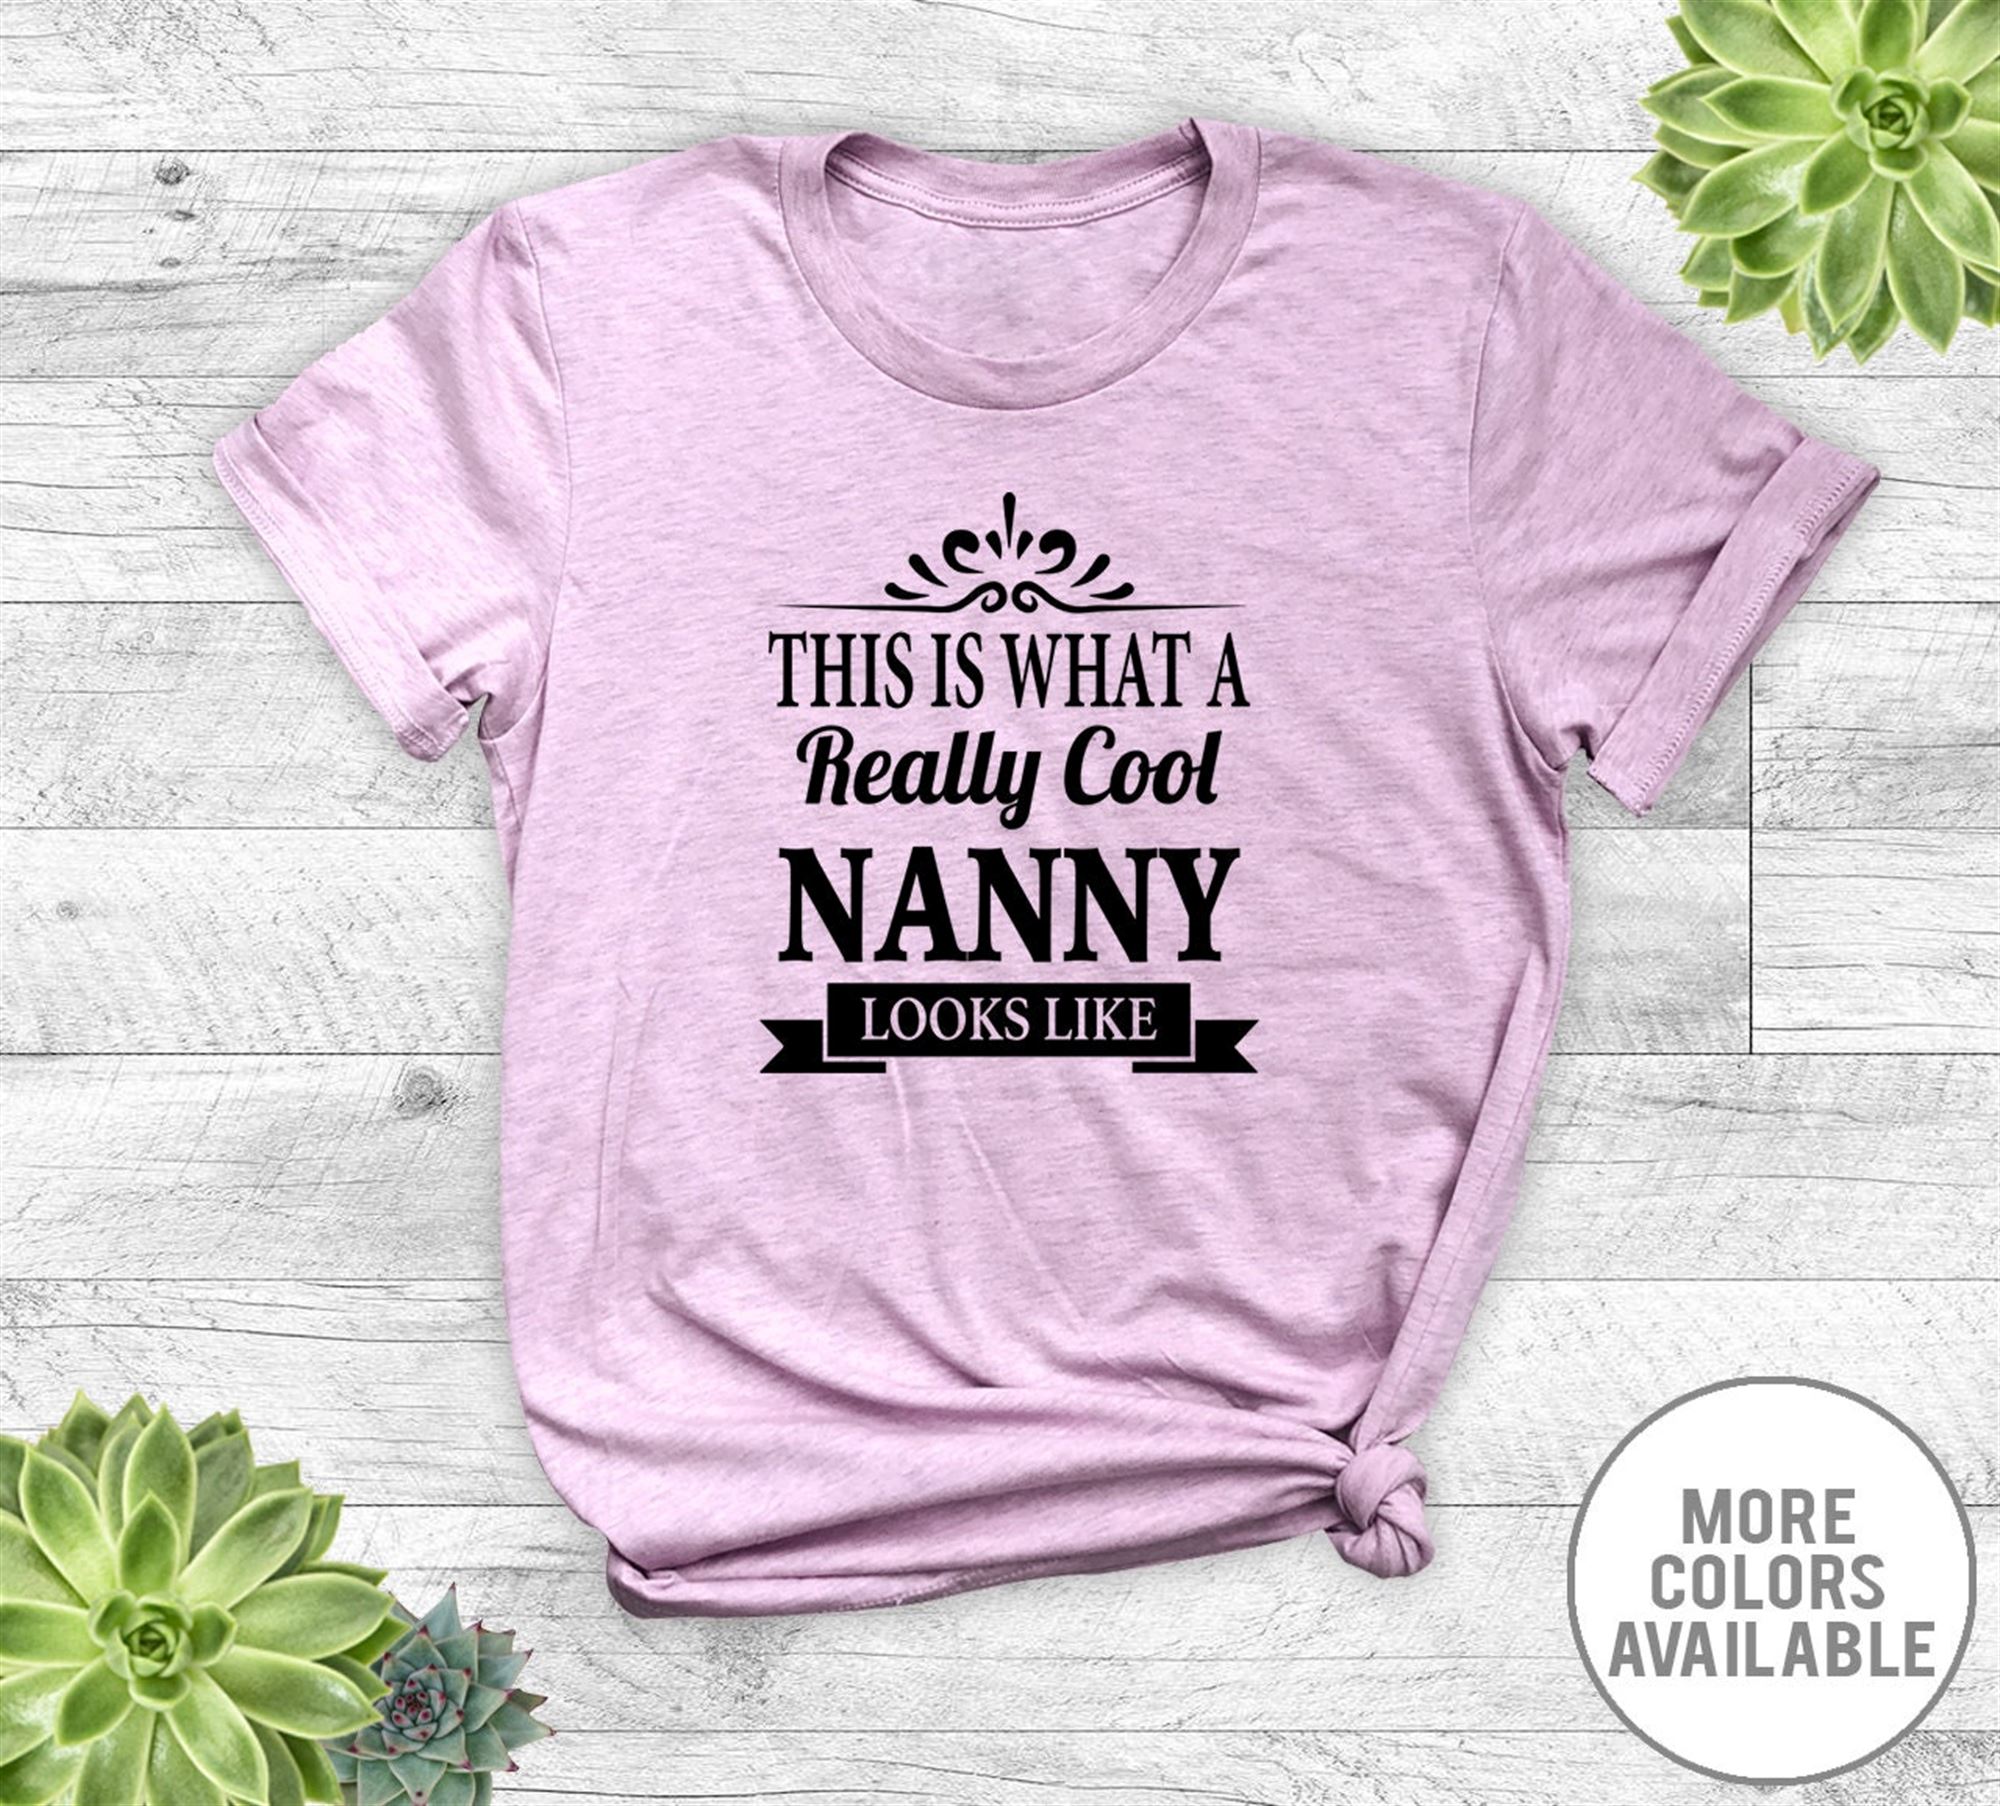 Limited Editon This Is What A Really Cool Nanny Looks Like - Unisex T-shirt - Nanny Shirt - Nanny Gift 